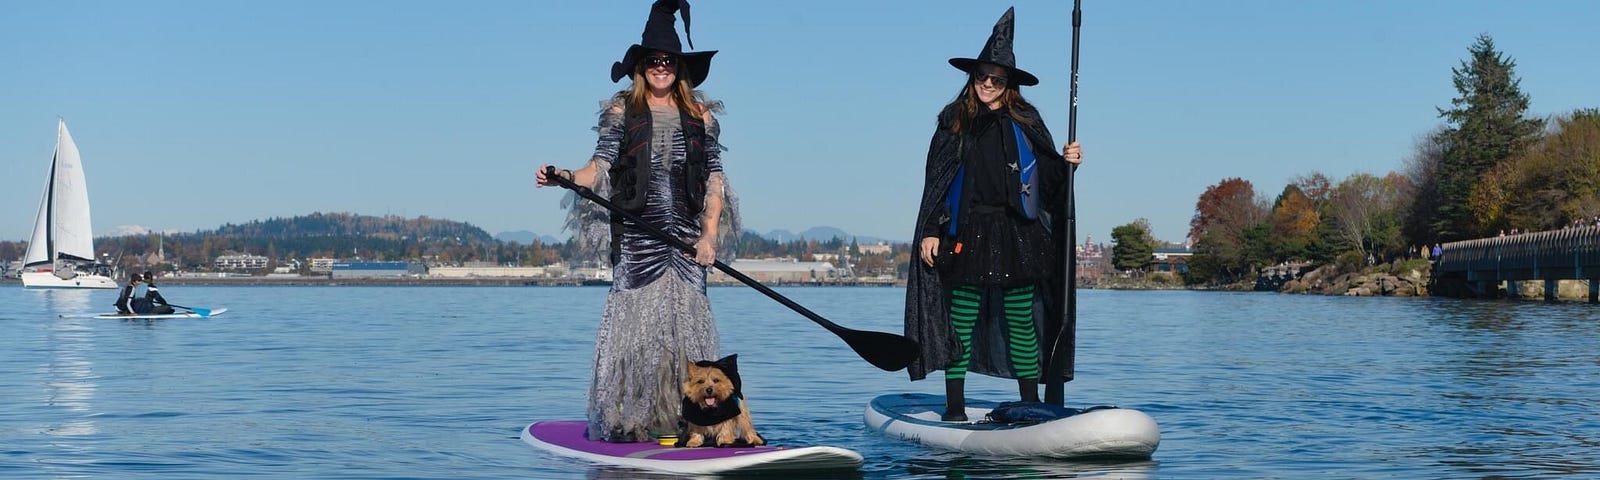 two ladies dressed like witches ride their paddle boards with a little dog in the front